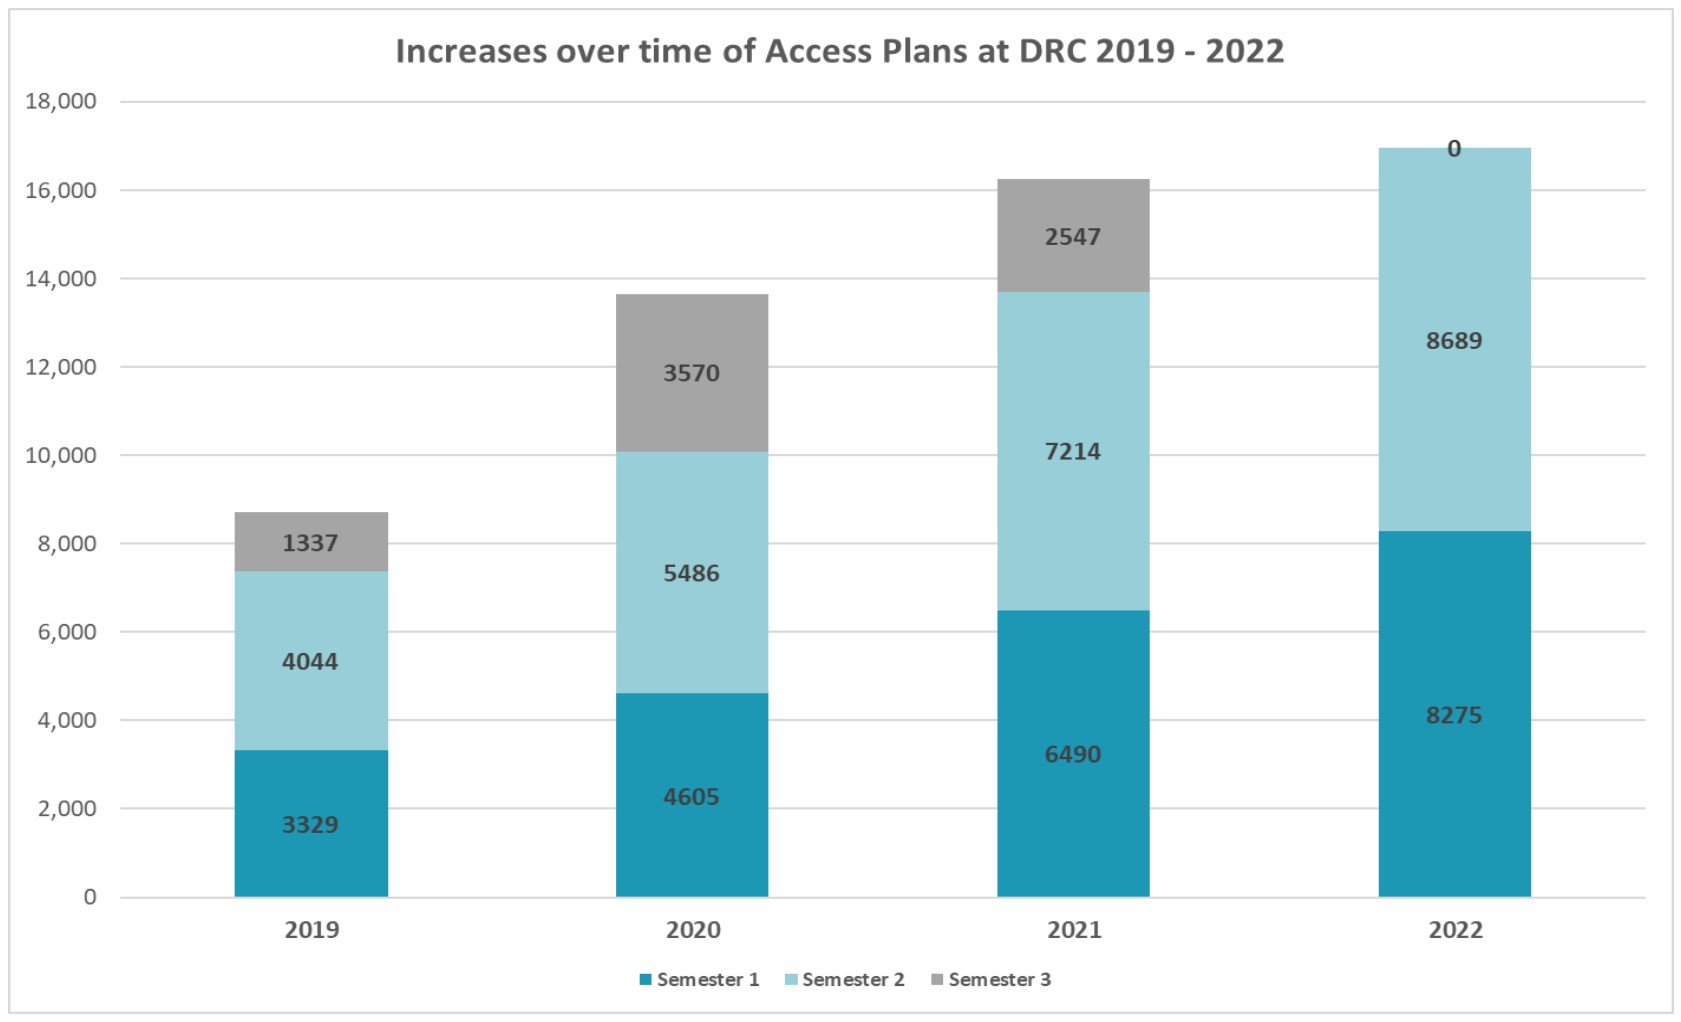 Bar Graph showing increases of Access Plans by year for Deakin University. Total Access Plans in 2019 were 10729, 2020 were 15681, 2021 were 18272 and 2022 were 18986 (figure doesn't include Trimester 3).